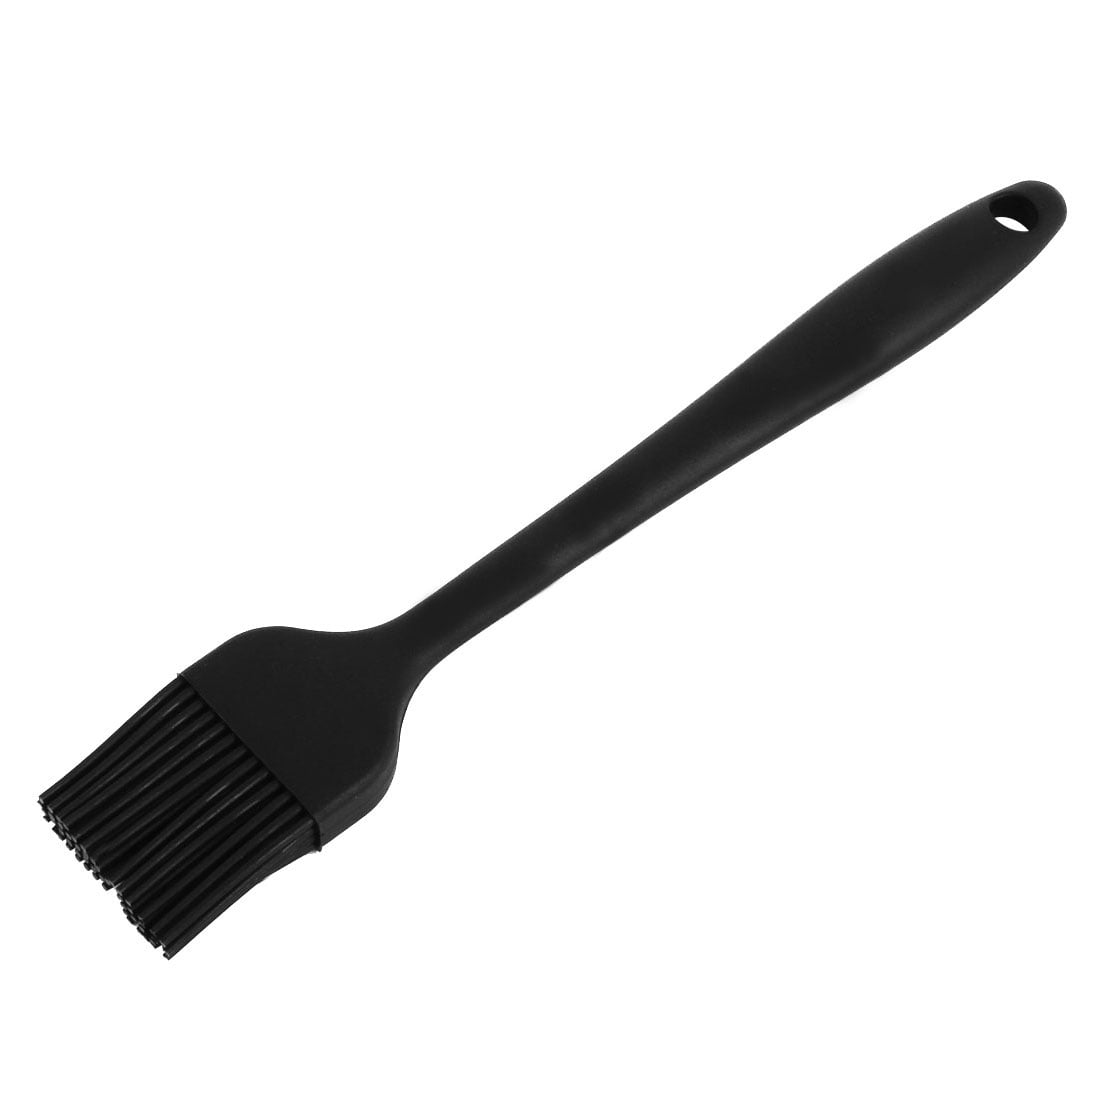 White Pastry Brushes for Kitchen